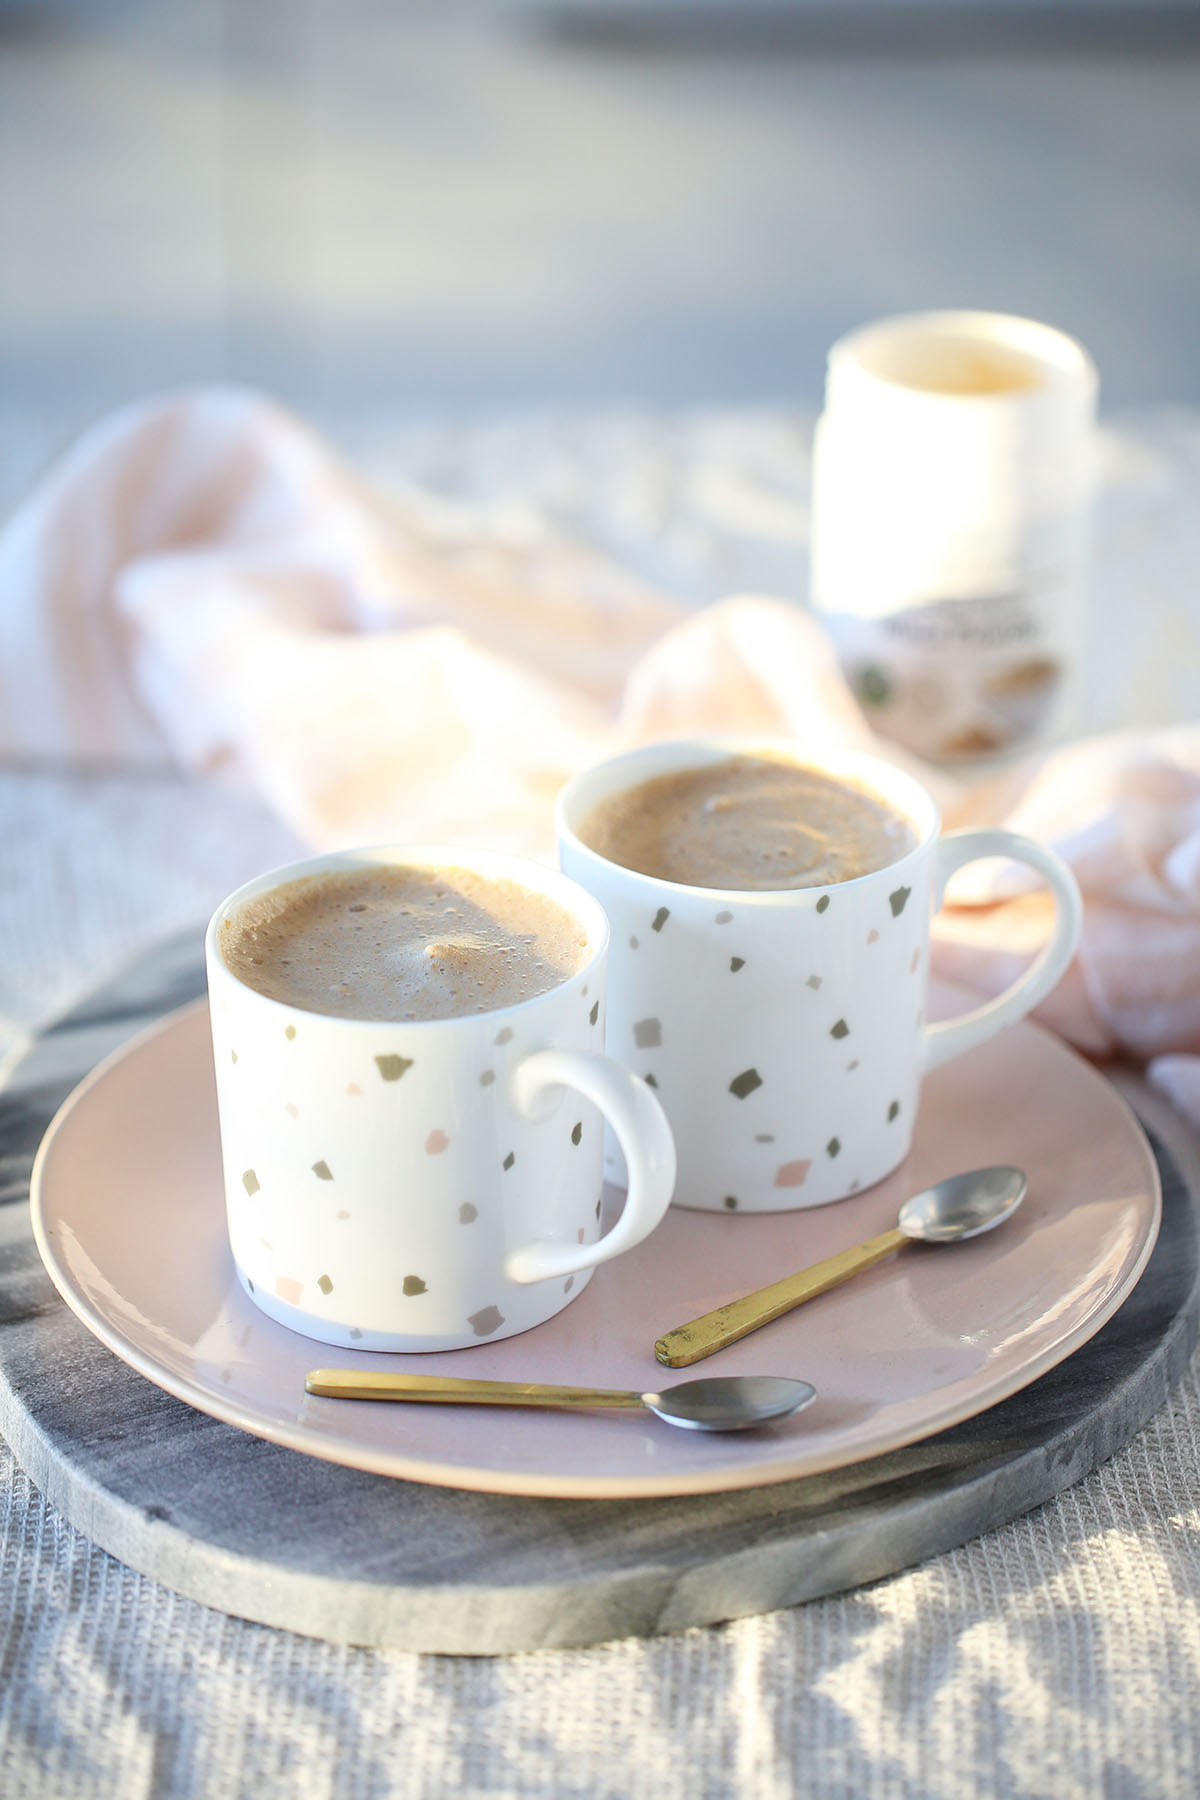 Two caramel maca lattes in spotty pastel mugs with gold spoons on a pink plate